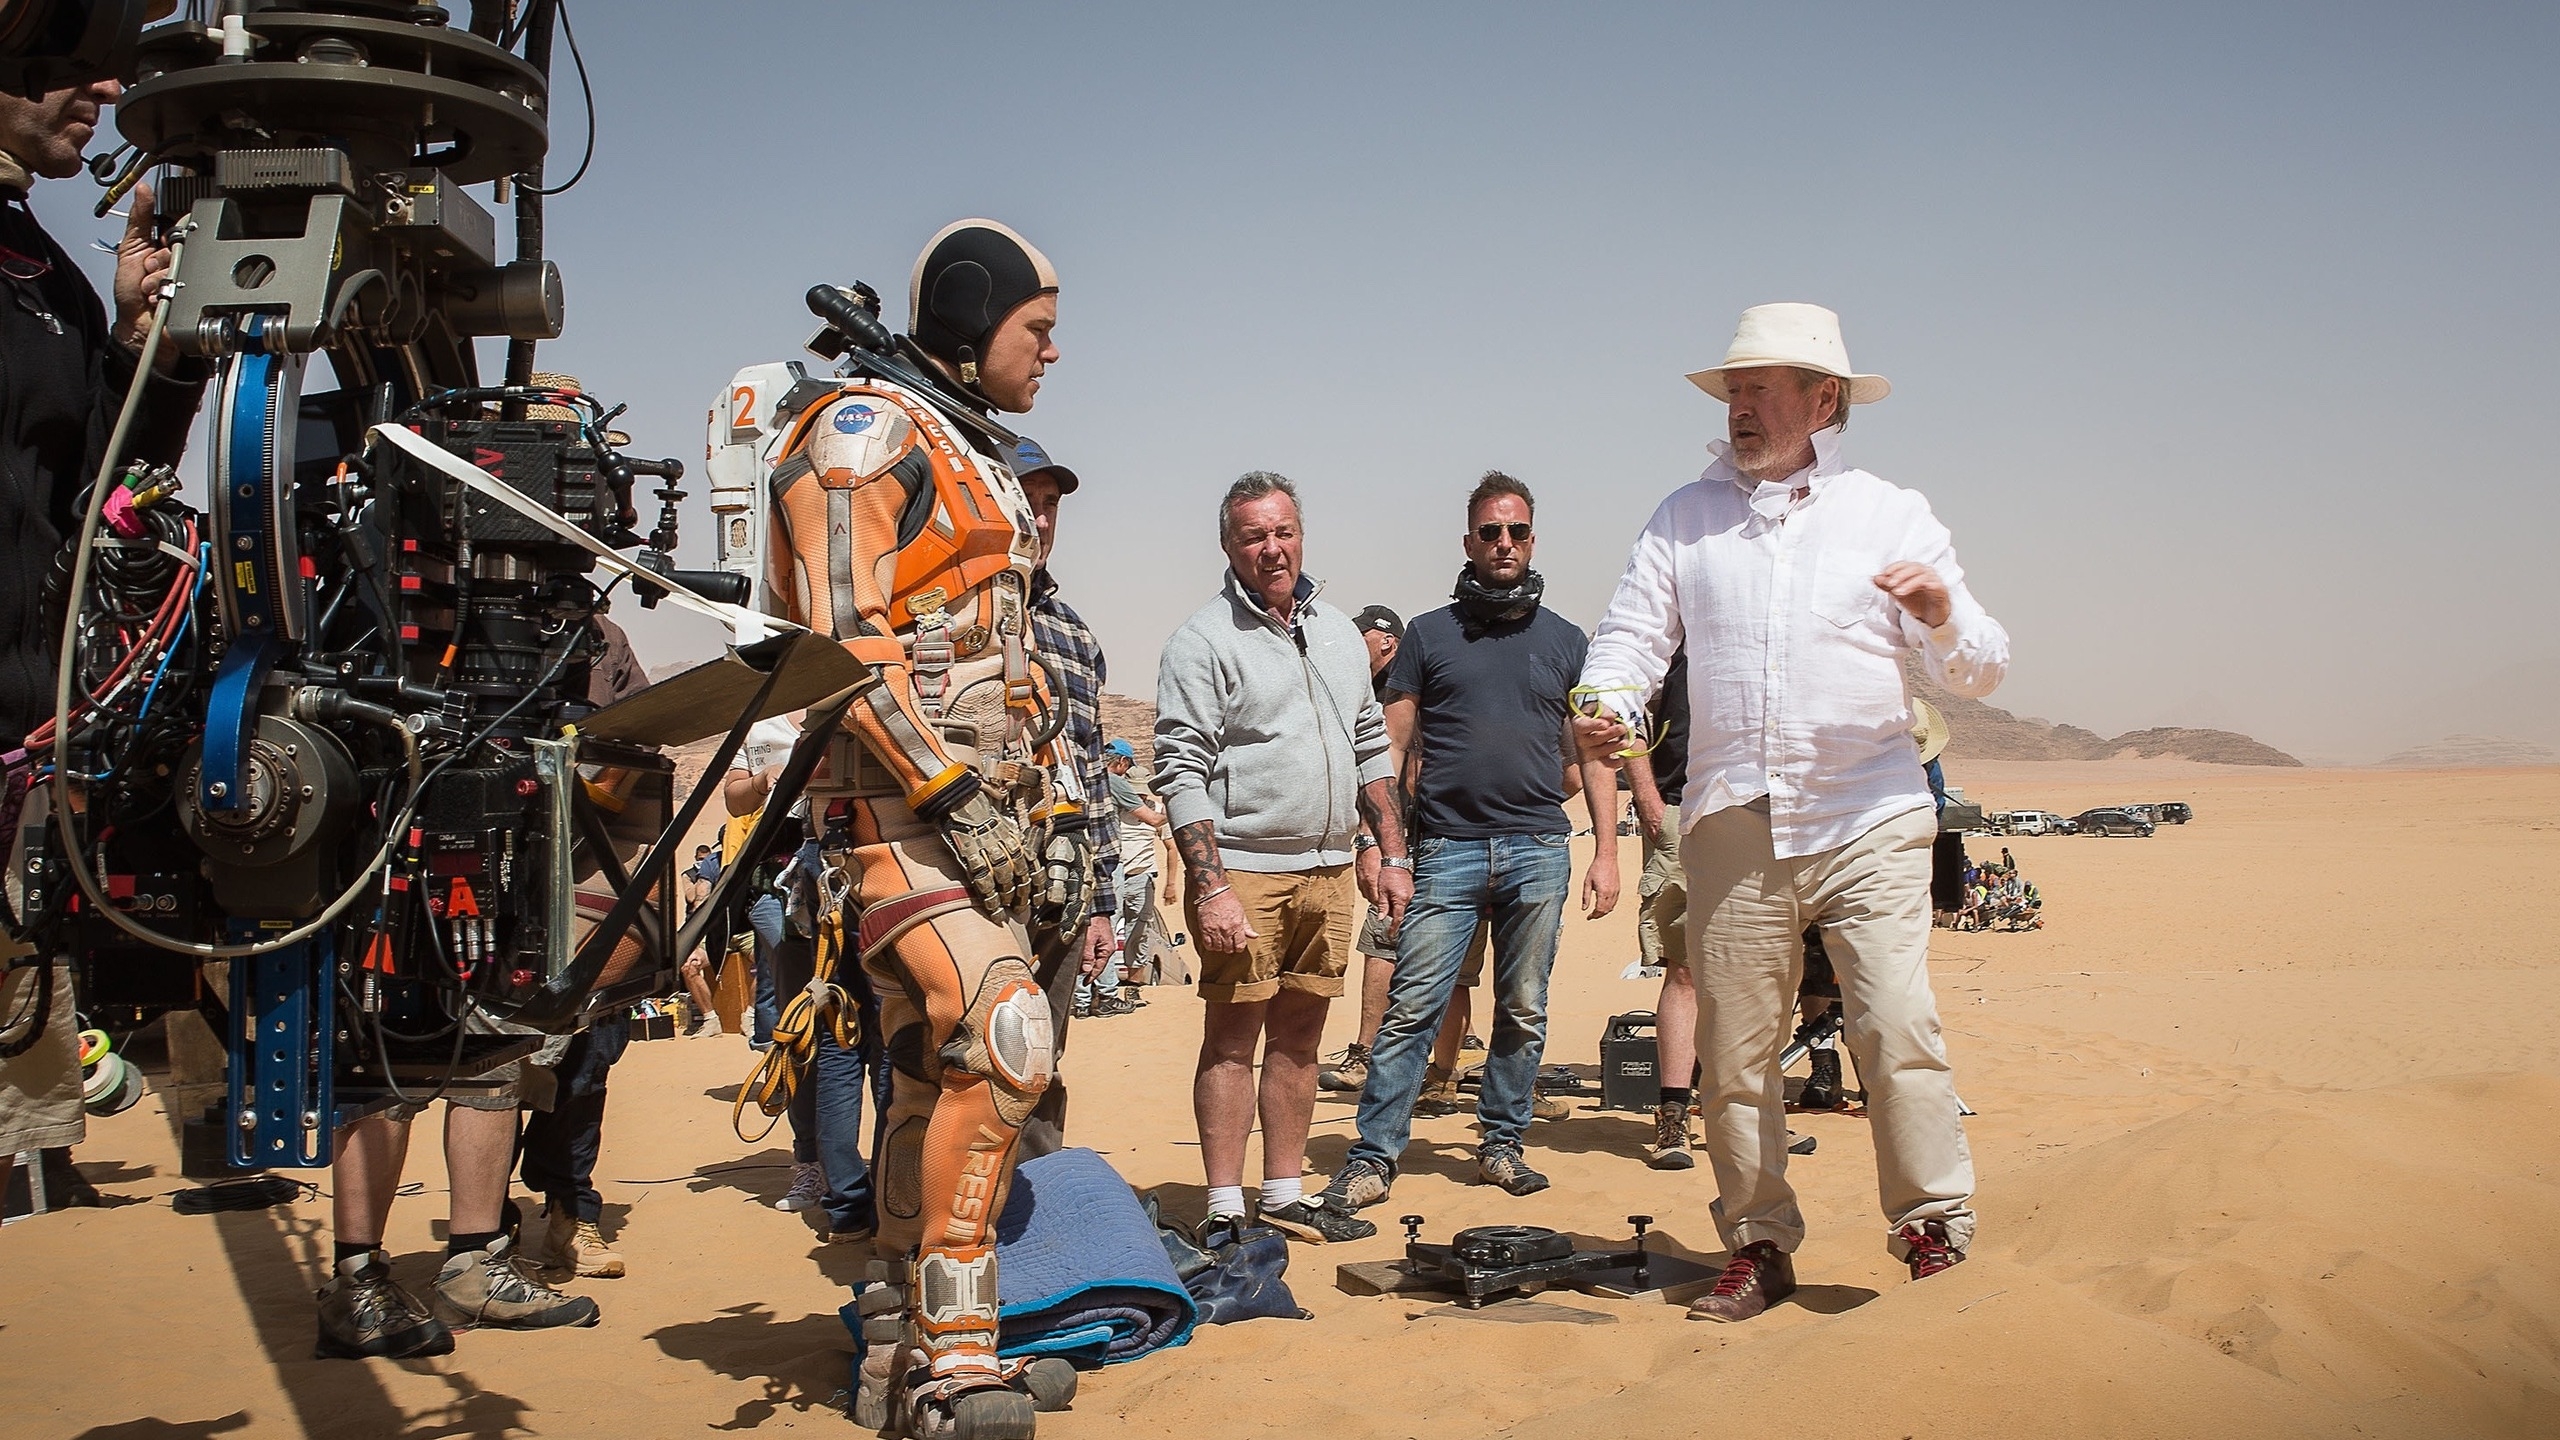 The Martian Directing for 2560x1440 HDTV resolution